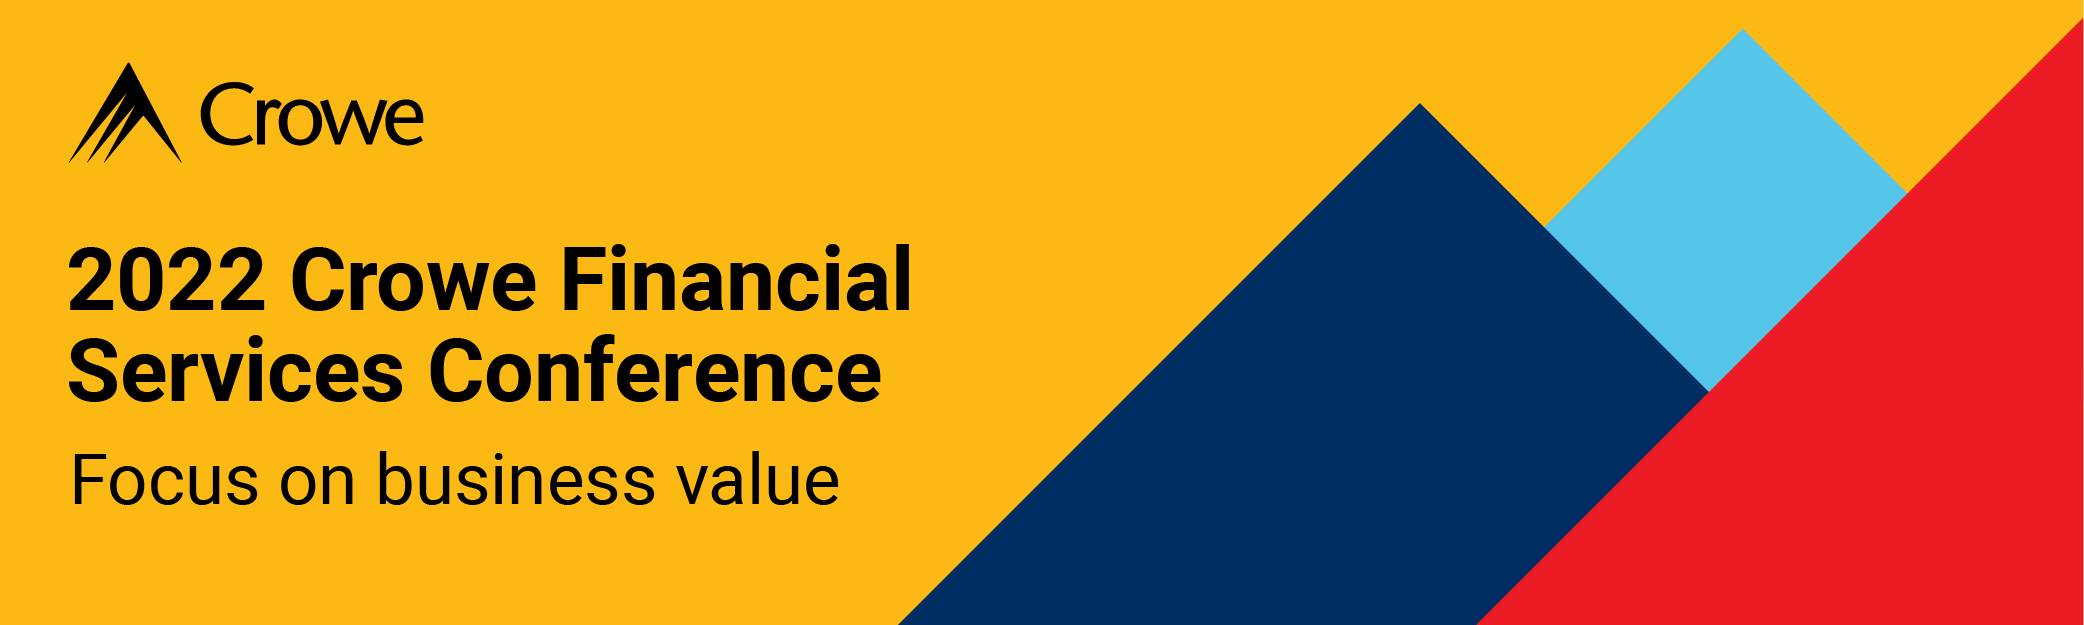 2022 Crowe Financial Services Conference